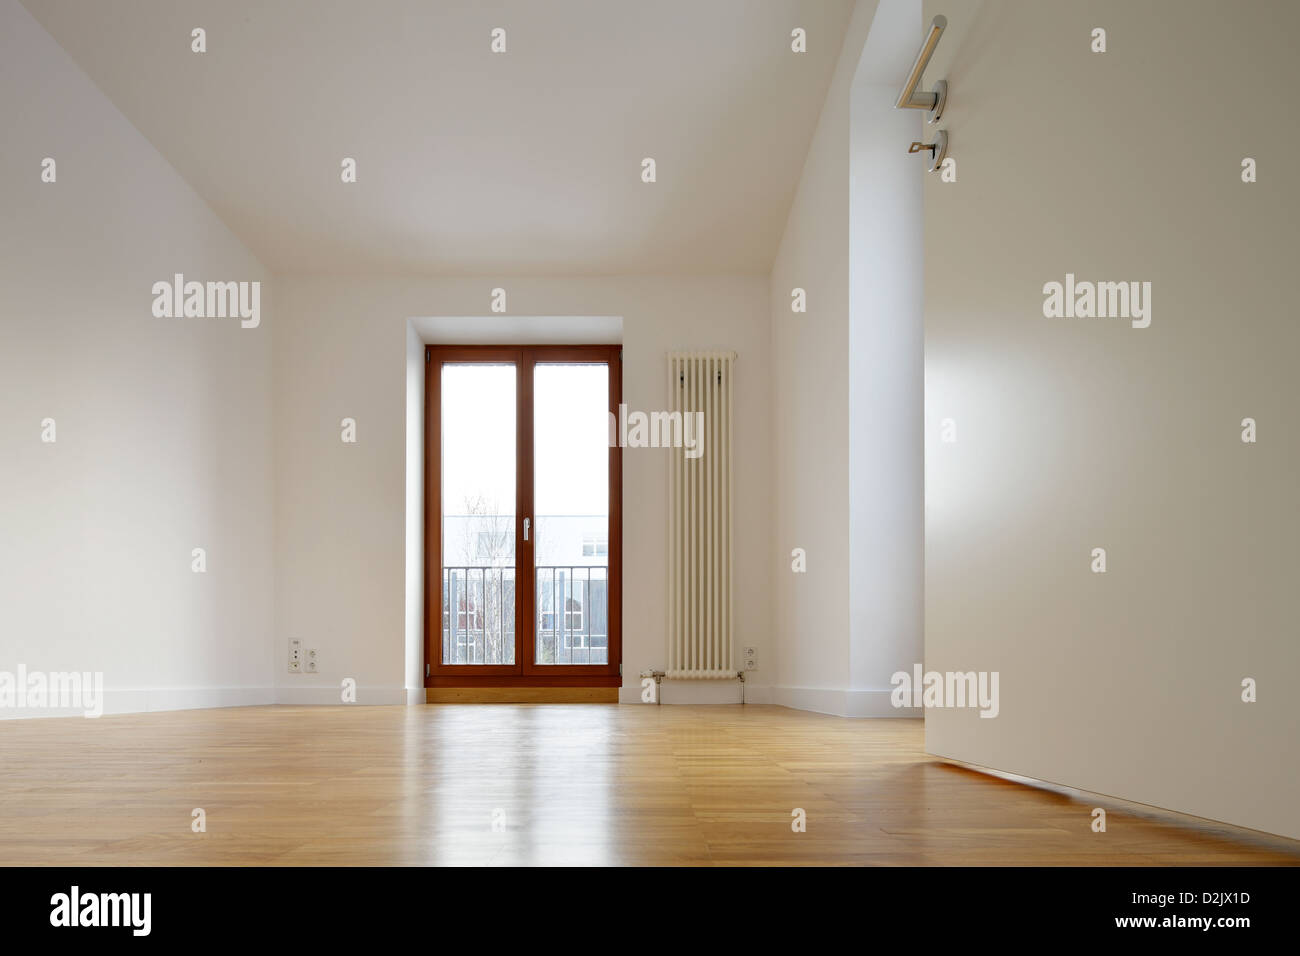 Berlin, Germany, rooms with parquet floors and wooden windows Stock Photo